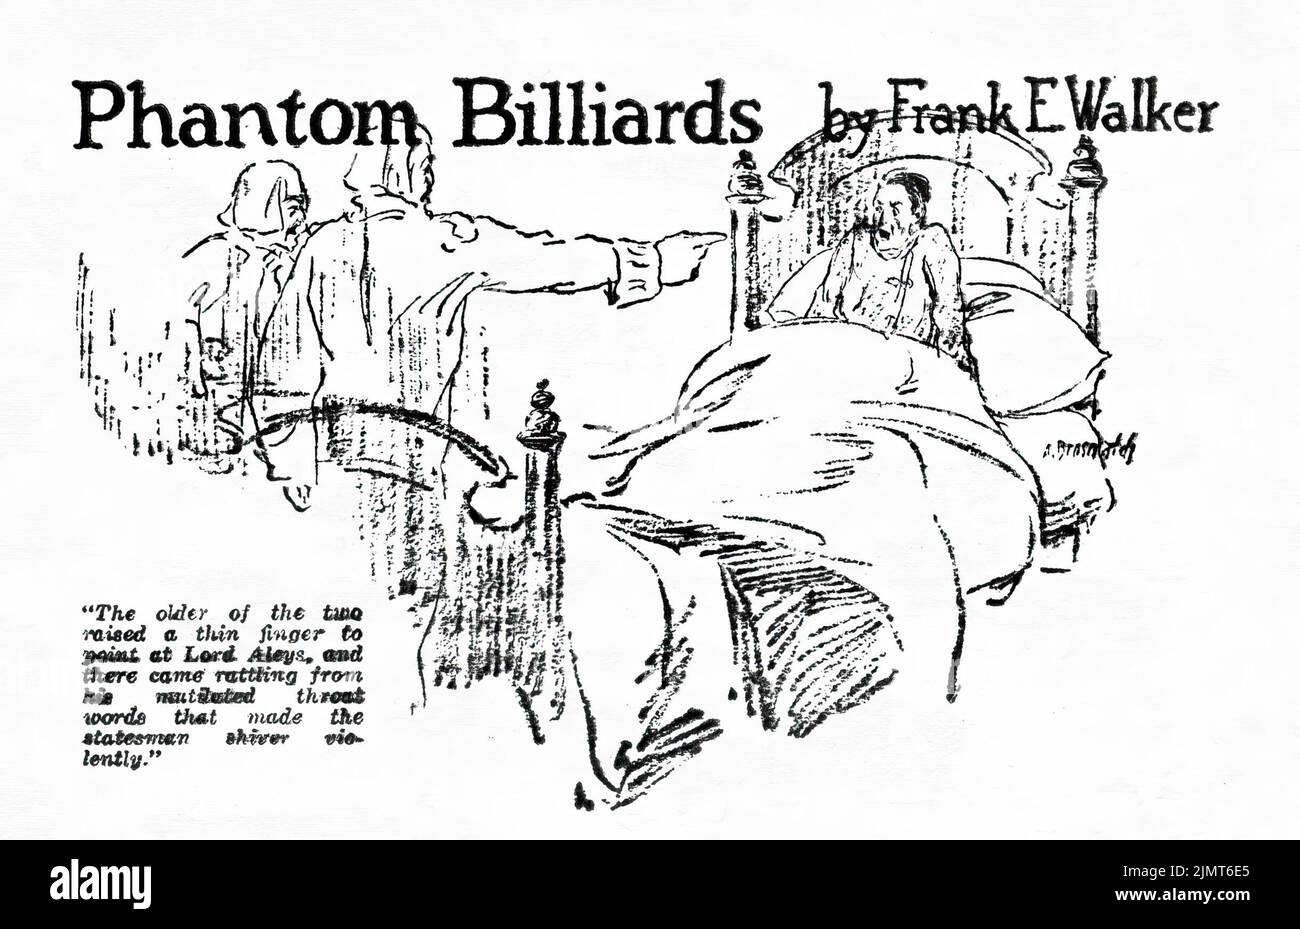 Phantom Billiards by Frank E. Walker. Illustration by Andrew Brosnatch from Weird Tales, February 1926 Stock Photo